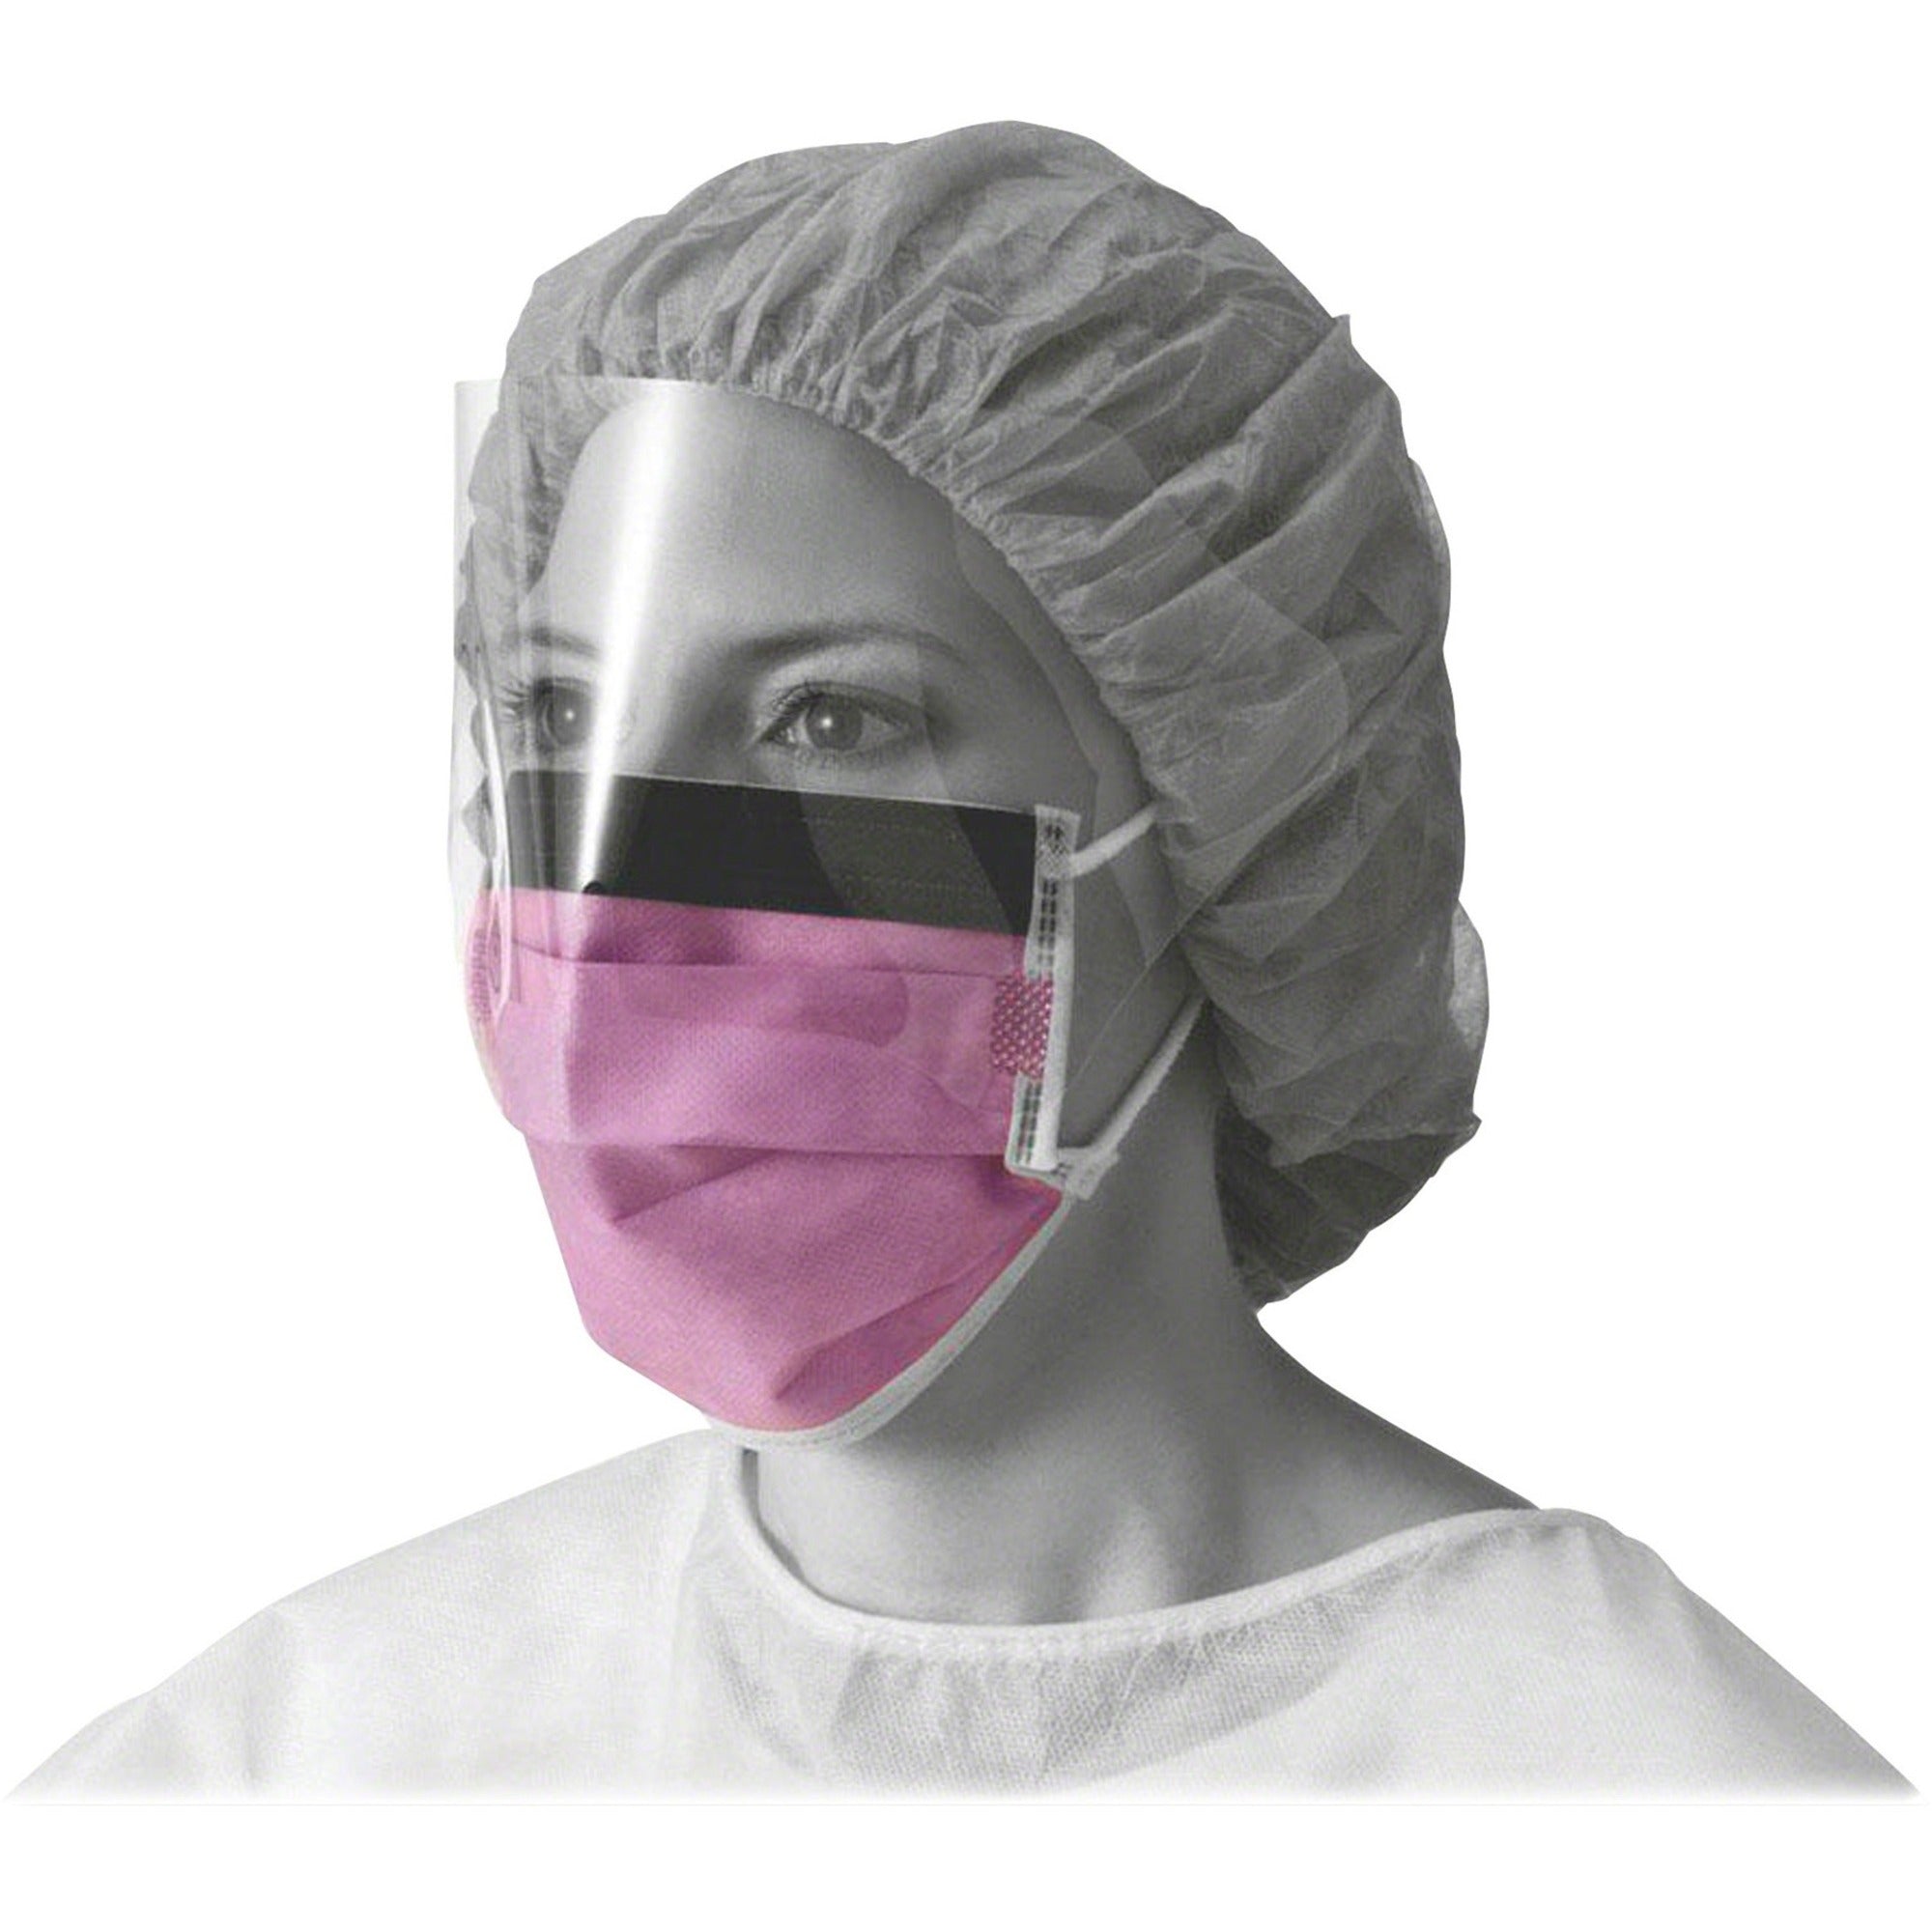 Medline Fluid-resistant Face Mask - Cellulose - Purple - Fluid Resistant, Earloop Style Mask, Fog Resistant, Latex-free - 25 / Box - 